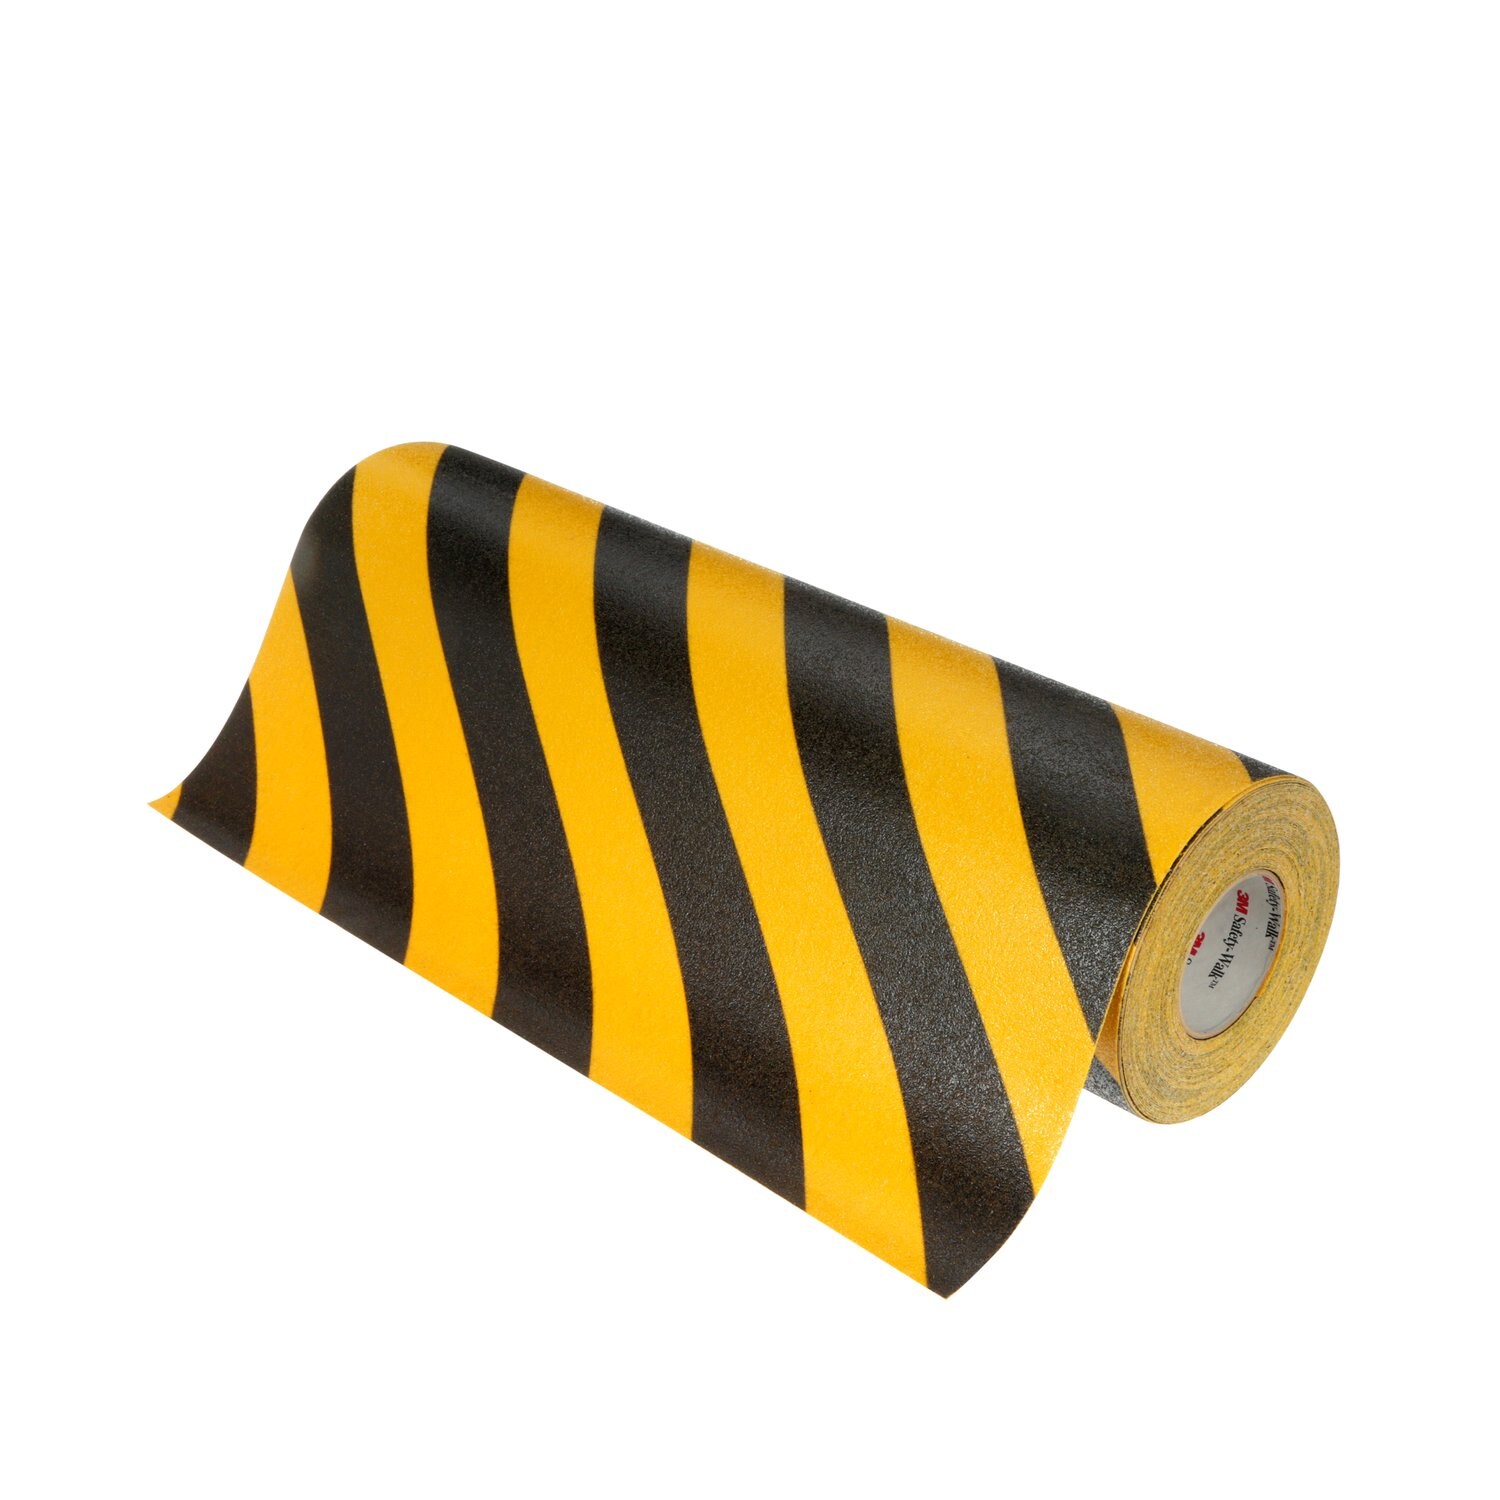 7100133326 - 3M Safety-Walk Slip-Resistant General Purpose Tapes & Treads 613,
Black/Yellow Stripe, 24 in x 60 ft, Roll, 1/Case